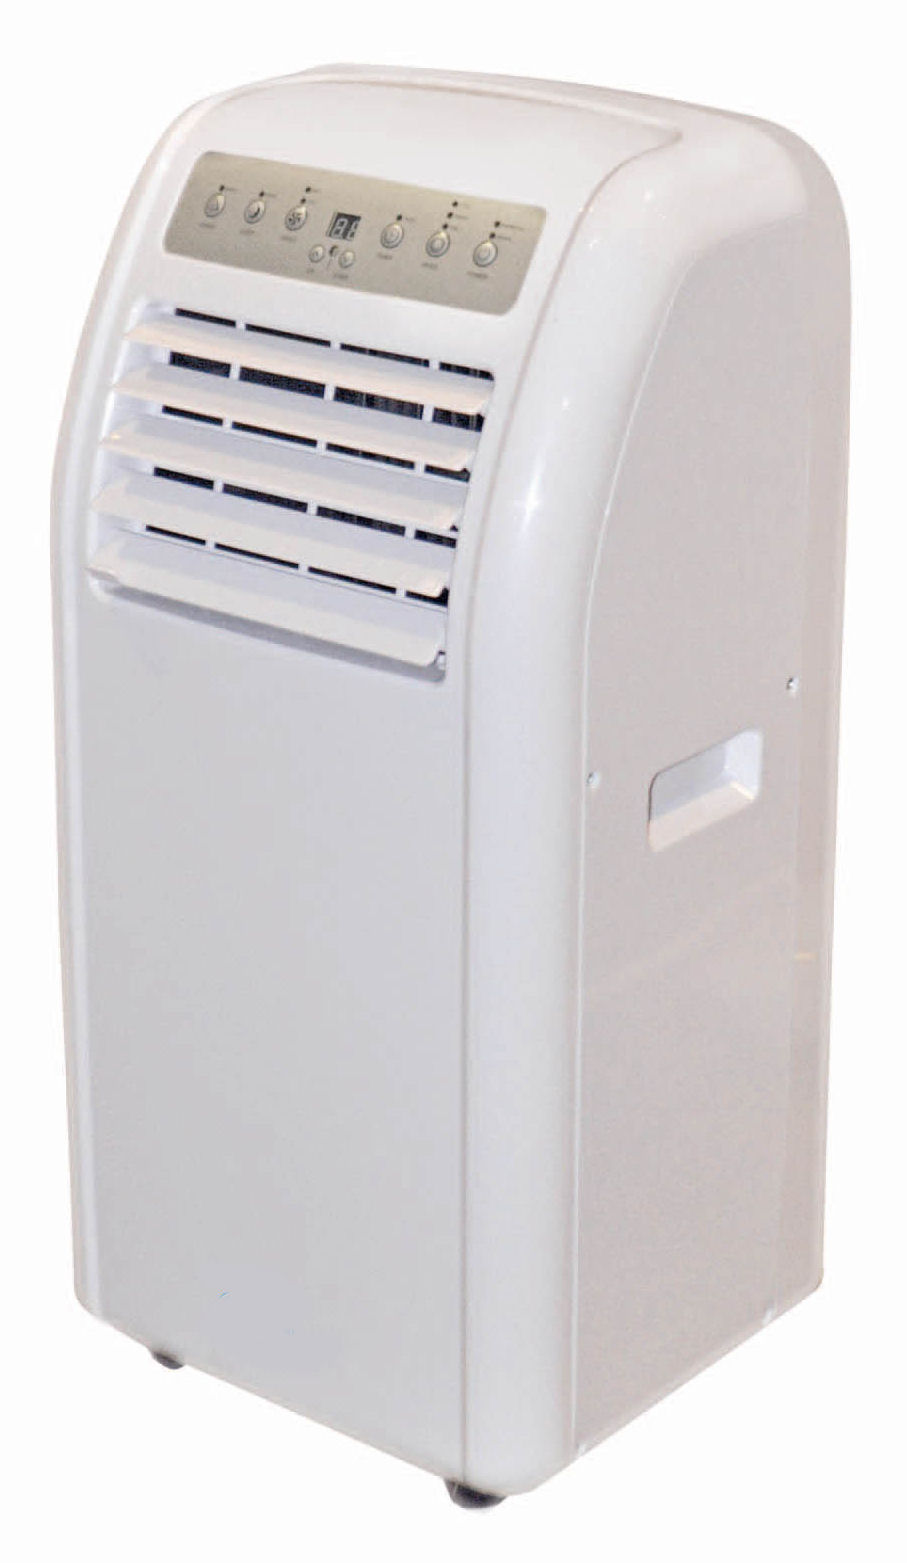 Air Conditioning Rental Kingston - Chilly Pepper Hire